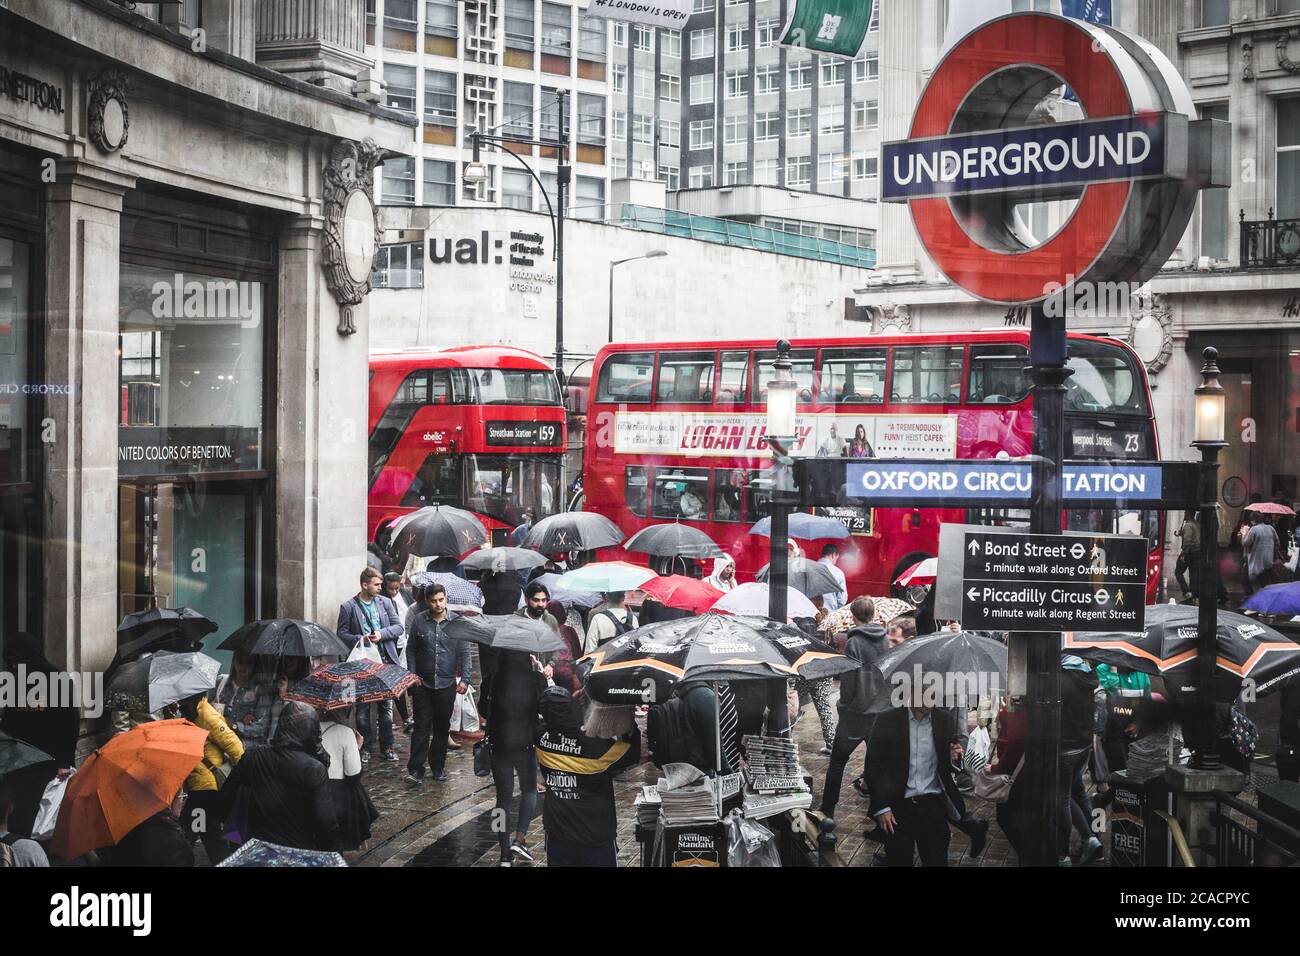 Oxford Street Underground station as seen from a bus on a rainy day. Stock Photo